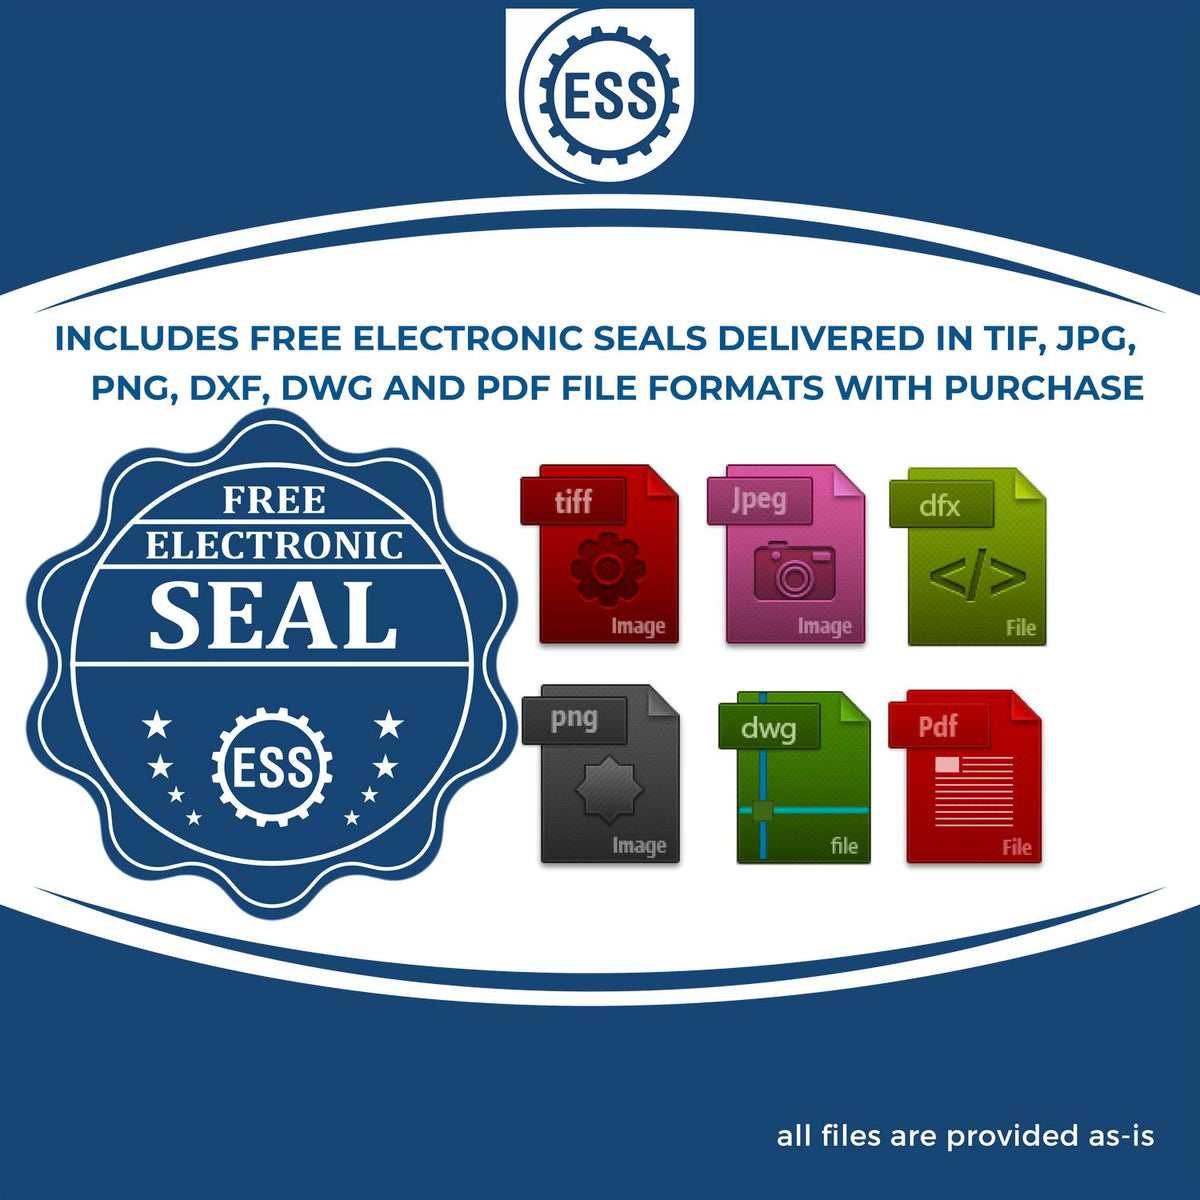 An infographic for the free electronic seal for the Virginia Desk Architect Embossing Seal illustrating the different file type icons such as DXF, DWG, TIF, JPG and PNG.